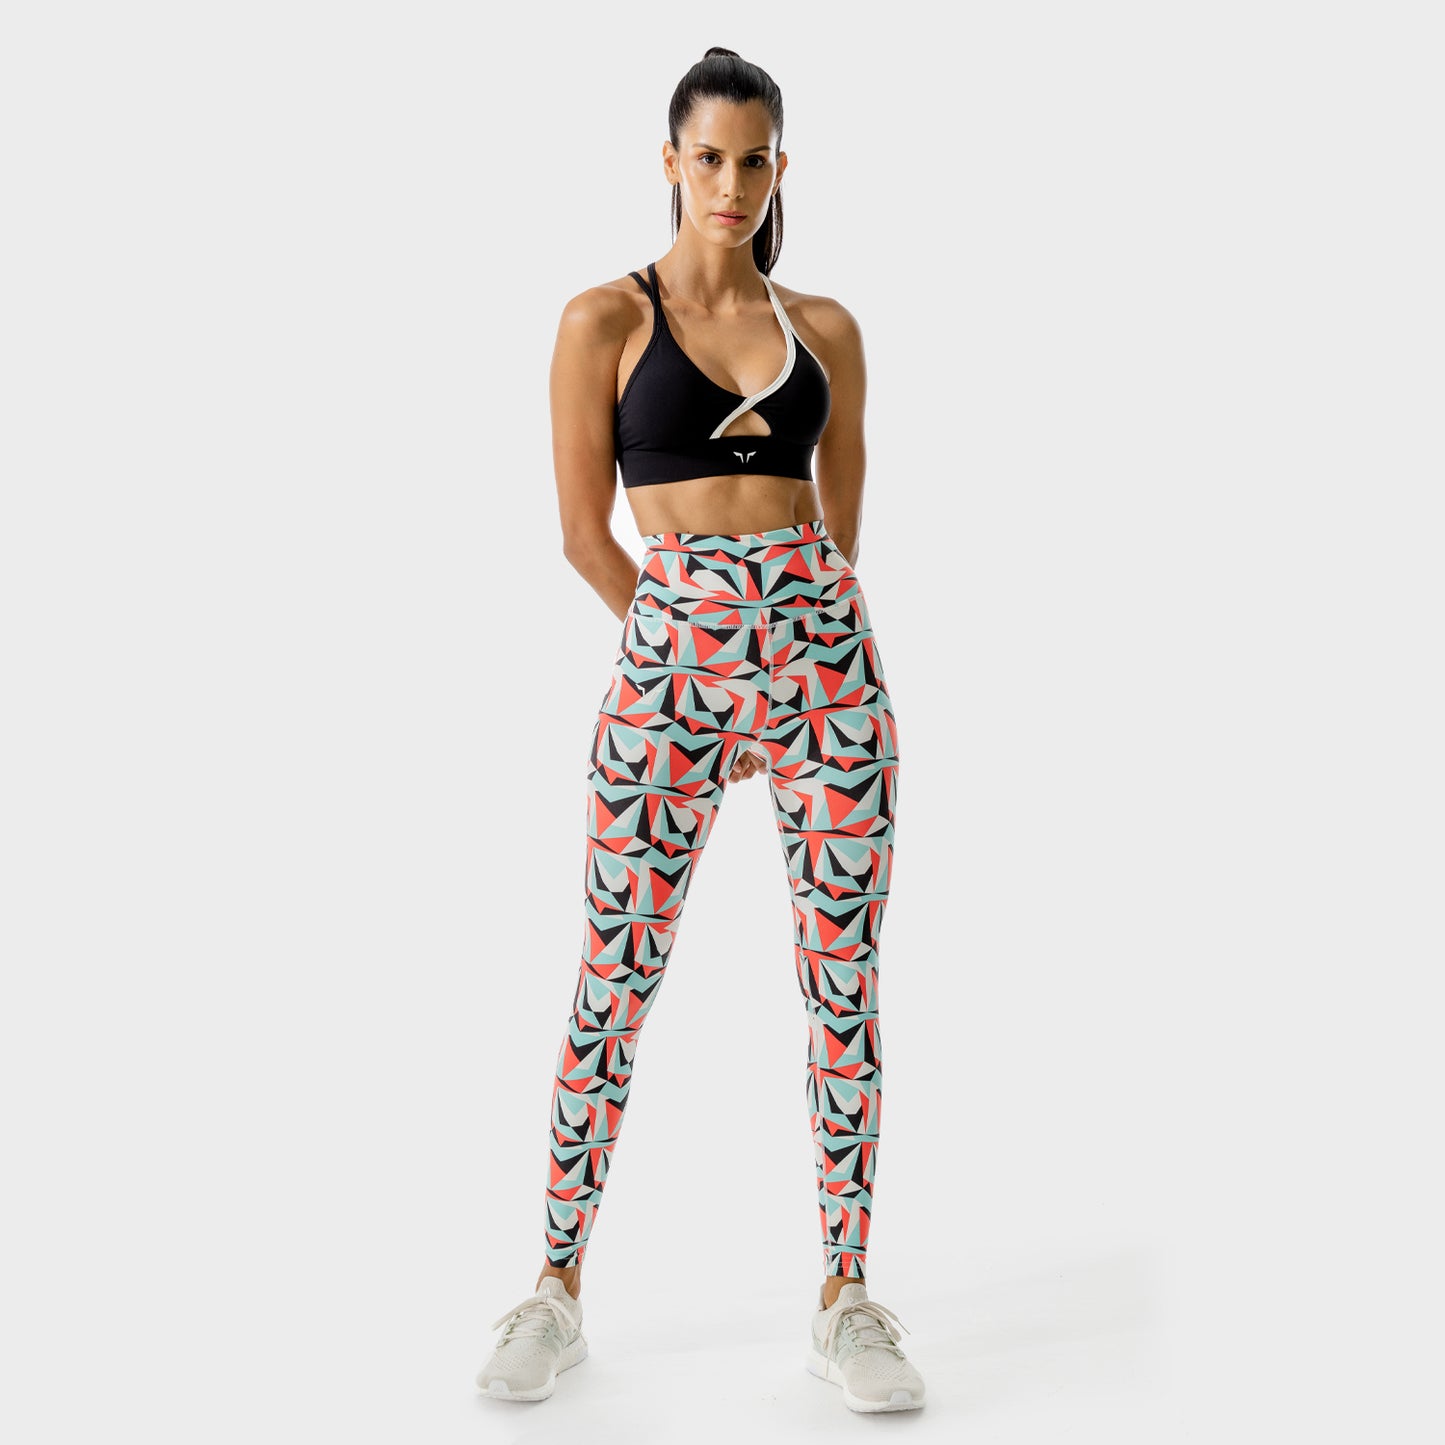 squatwolf-workout-clothes-lab-360-printed-leggings-pastel-turquoise-print-gym-leggings-for-women